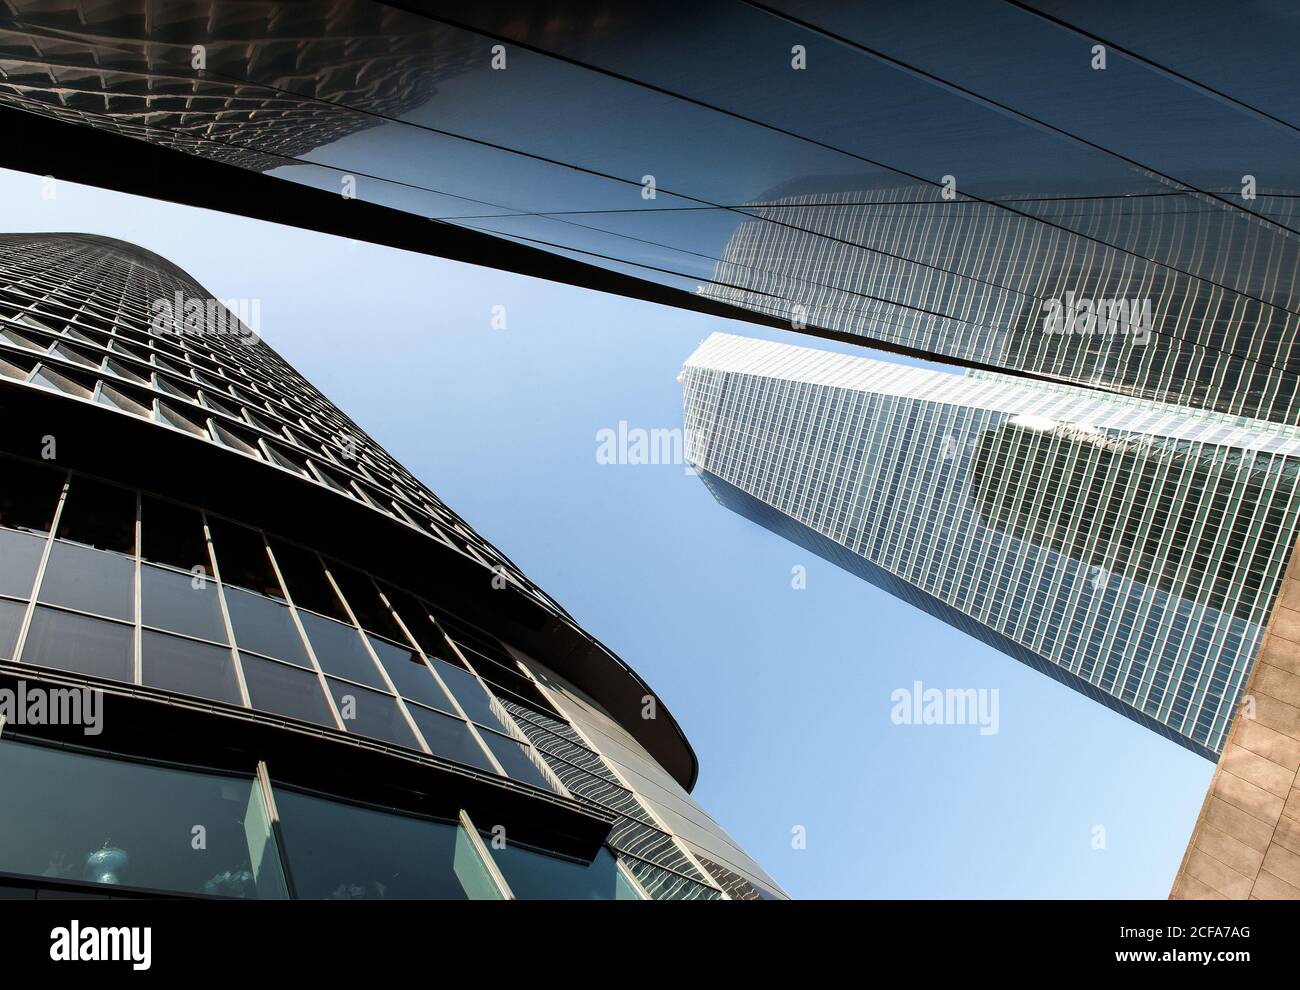 Perspective from below view of high rise towers with reflective glass facades in sunlight Stock Photo